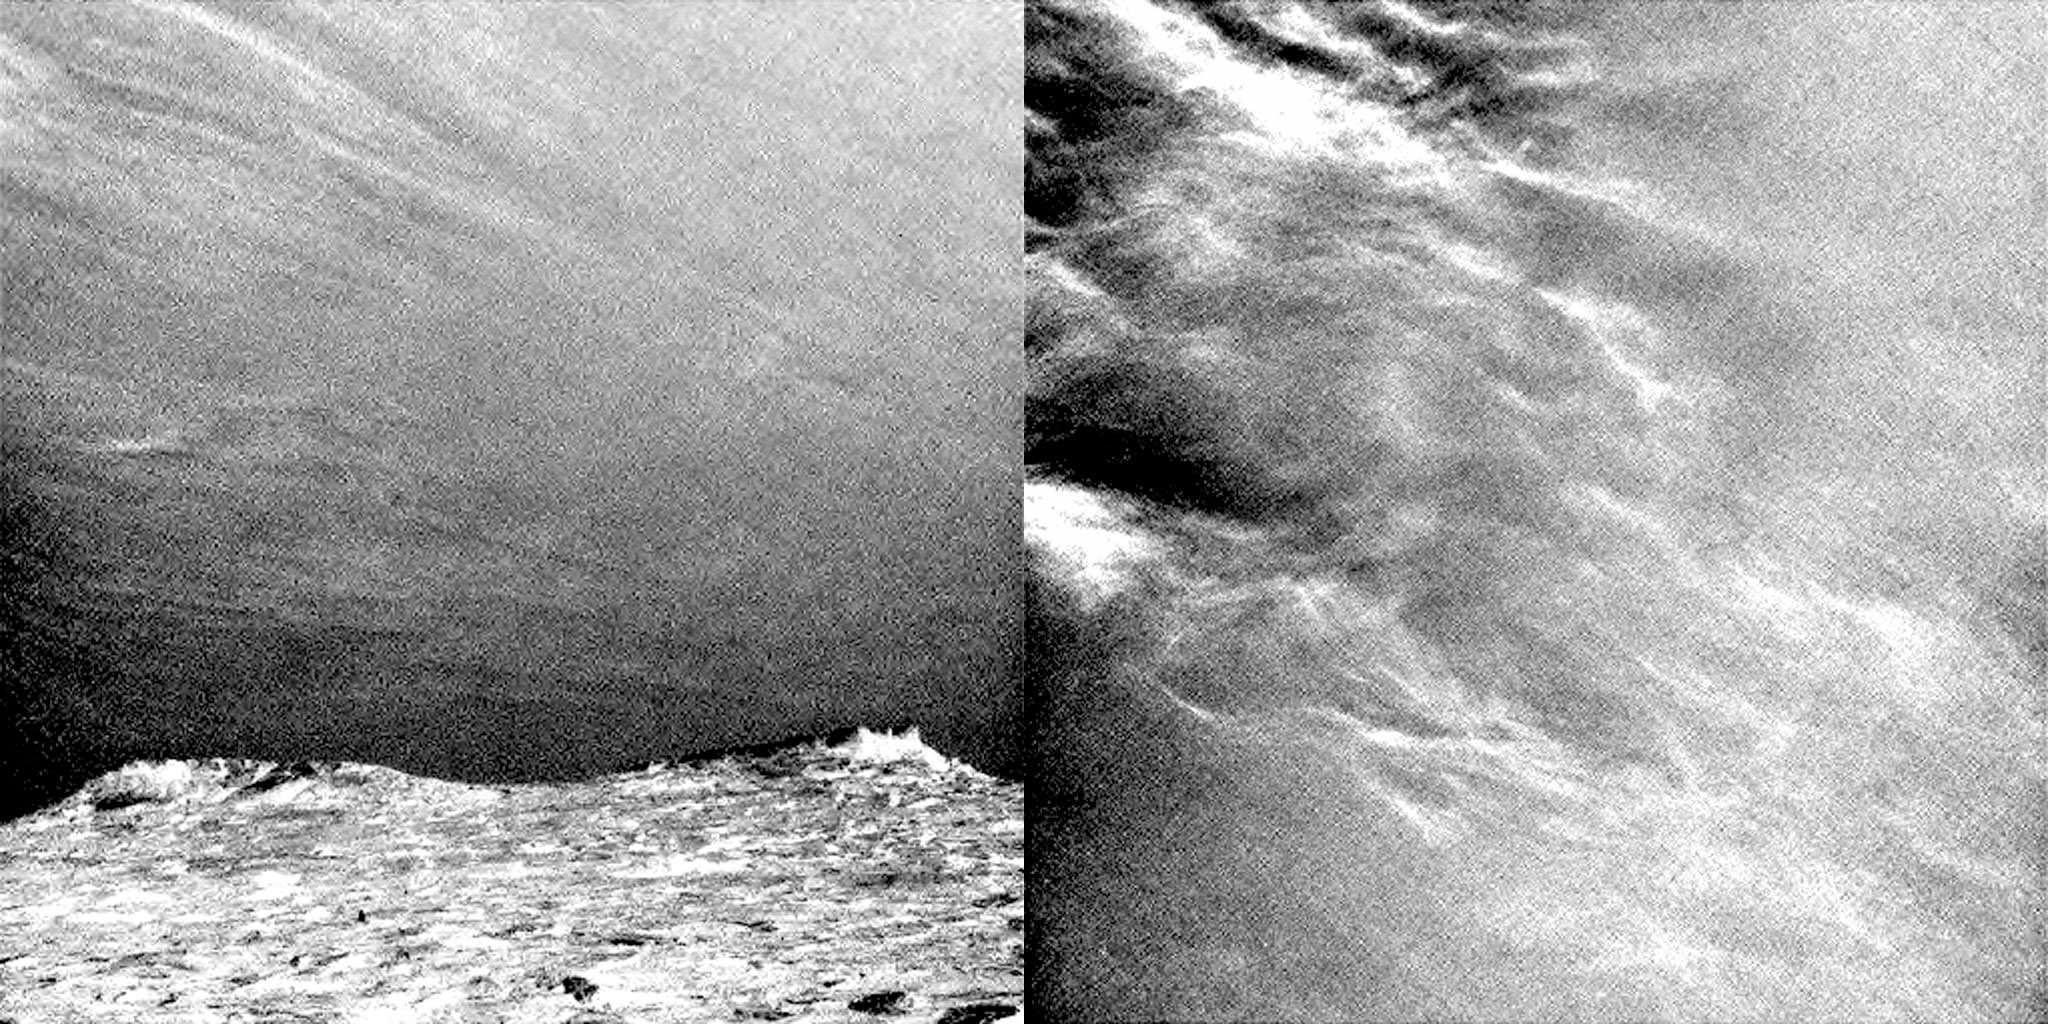 NASAs Curiosity Rover Captured Time-Lapses of Clouds on Mars